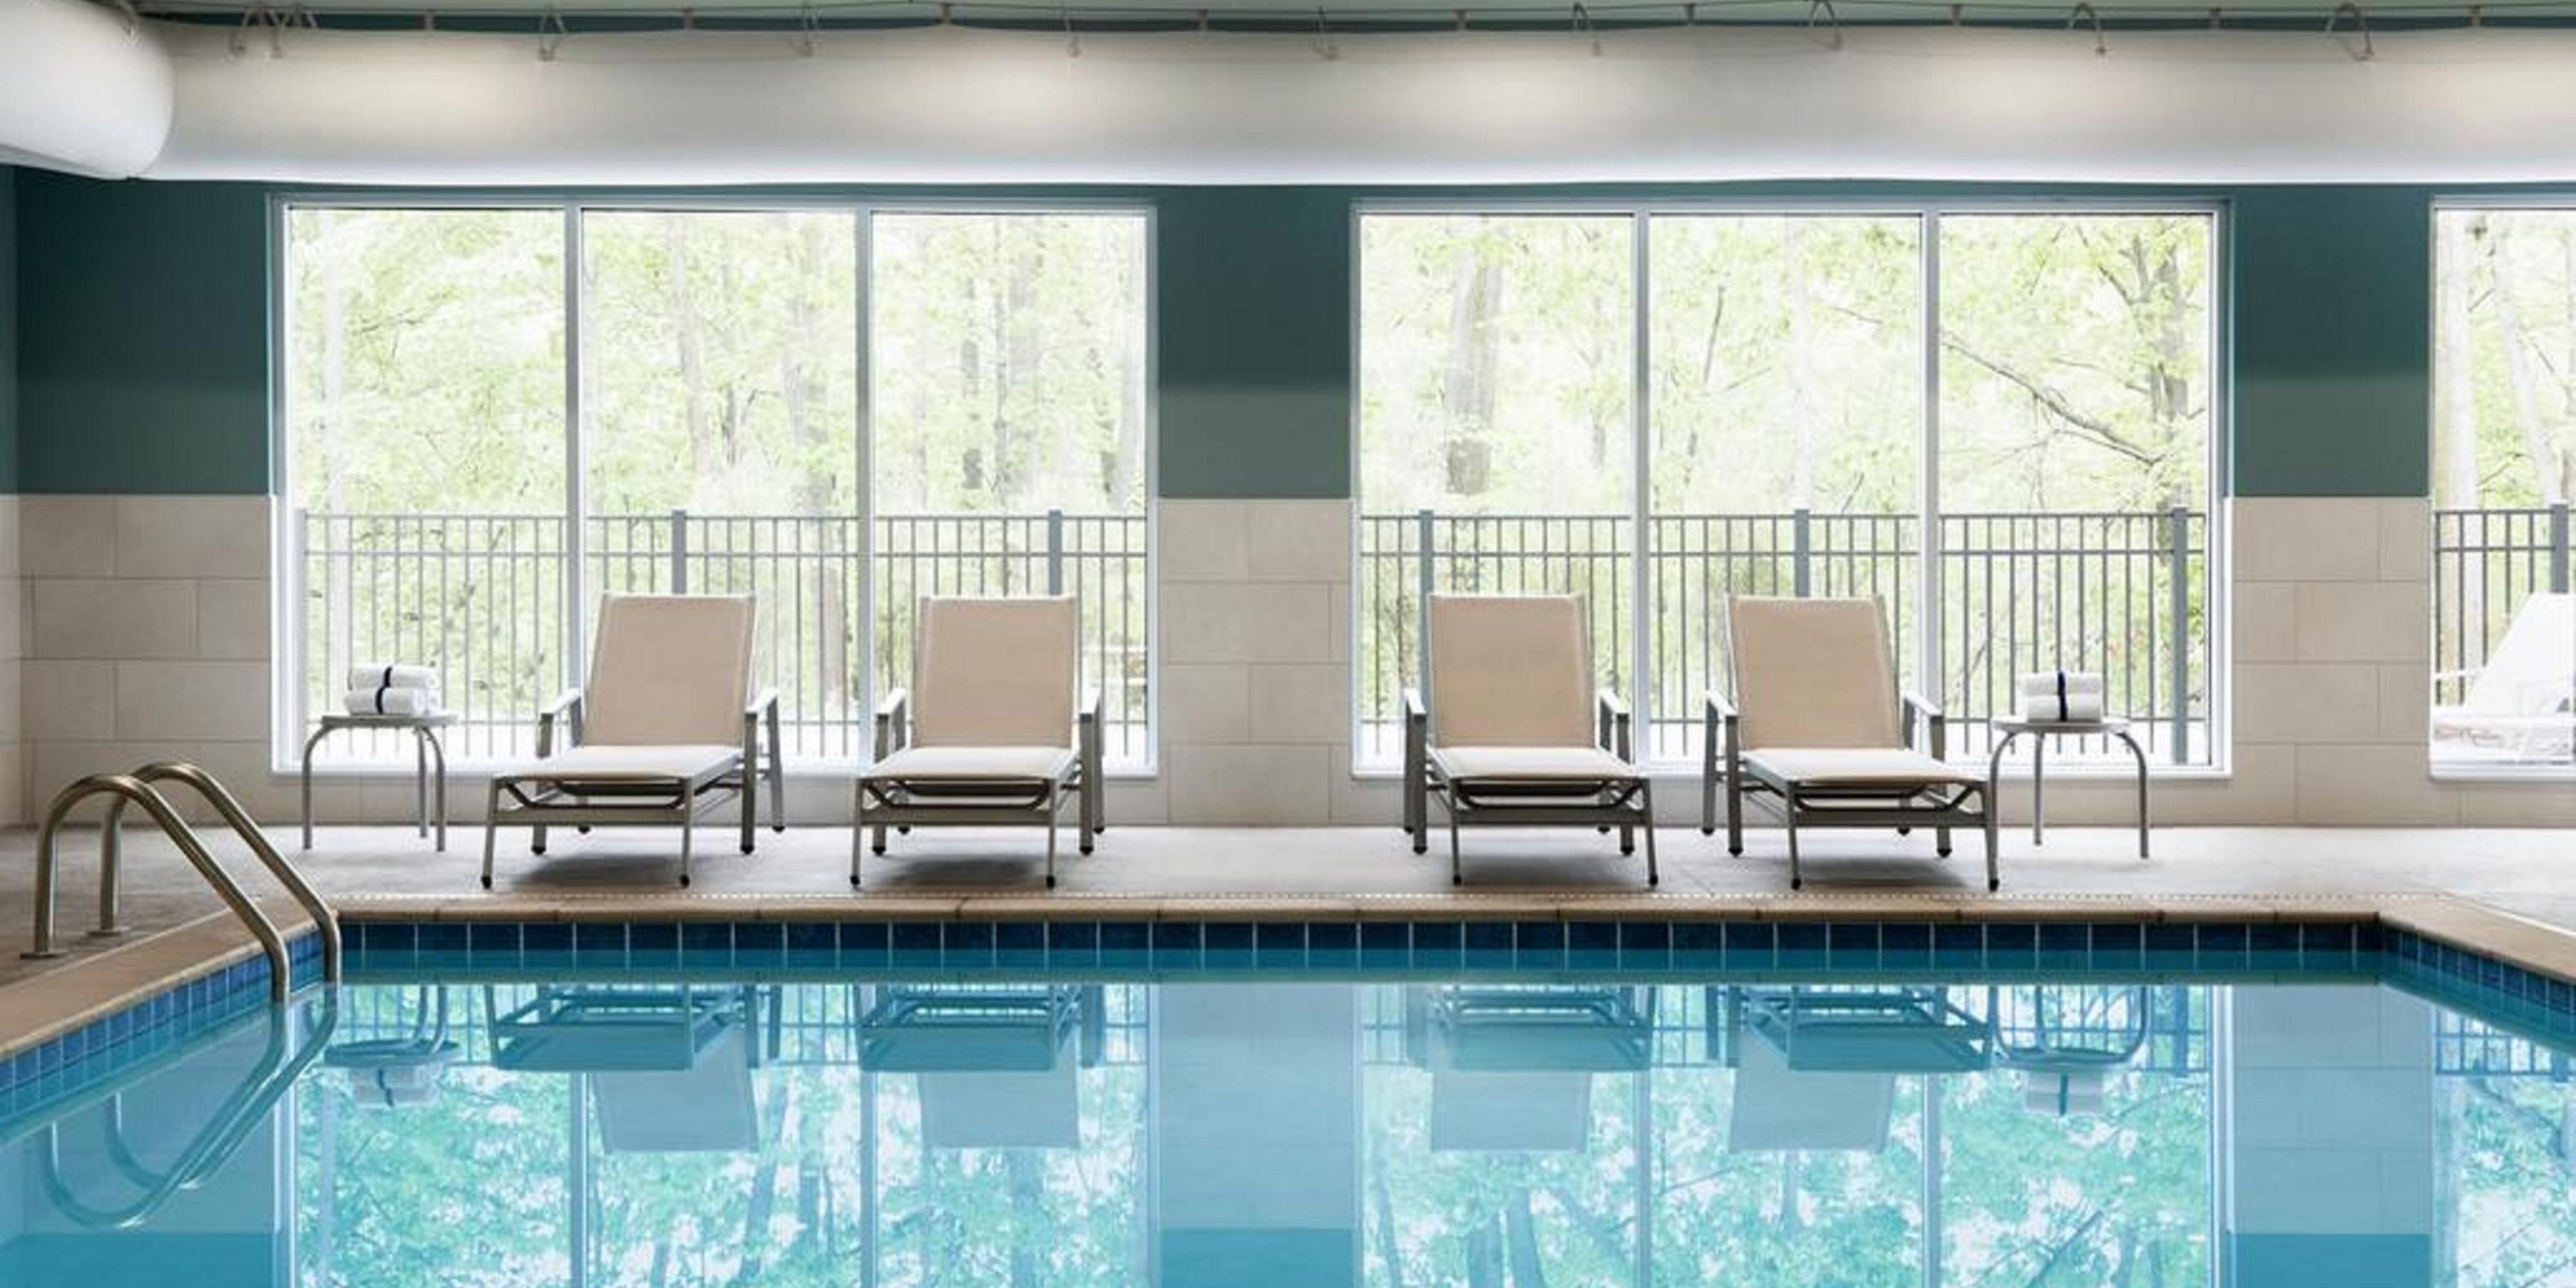 Be sure to take the time to enjoy our indoor pool during your stay. What a great way to relax, have fun, or get some exercise while traveling!